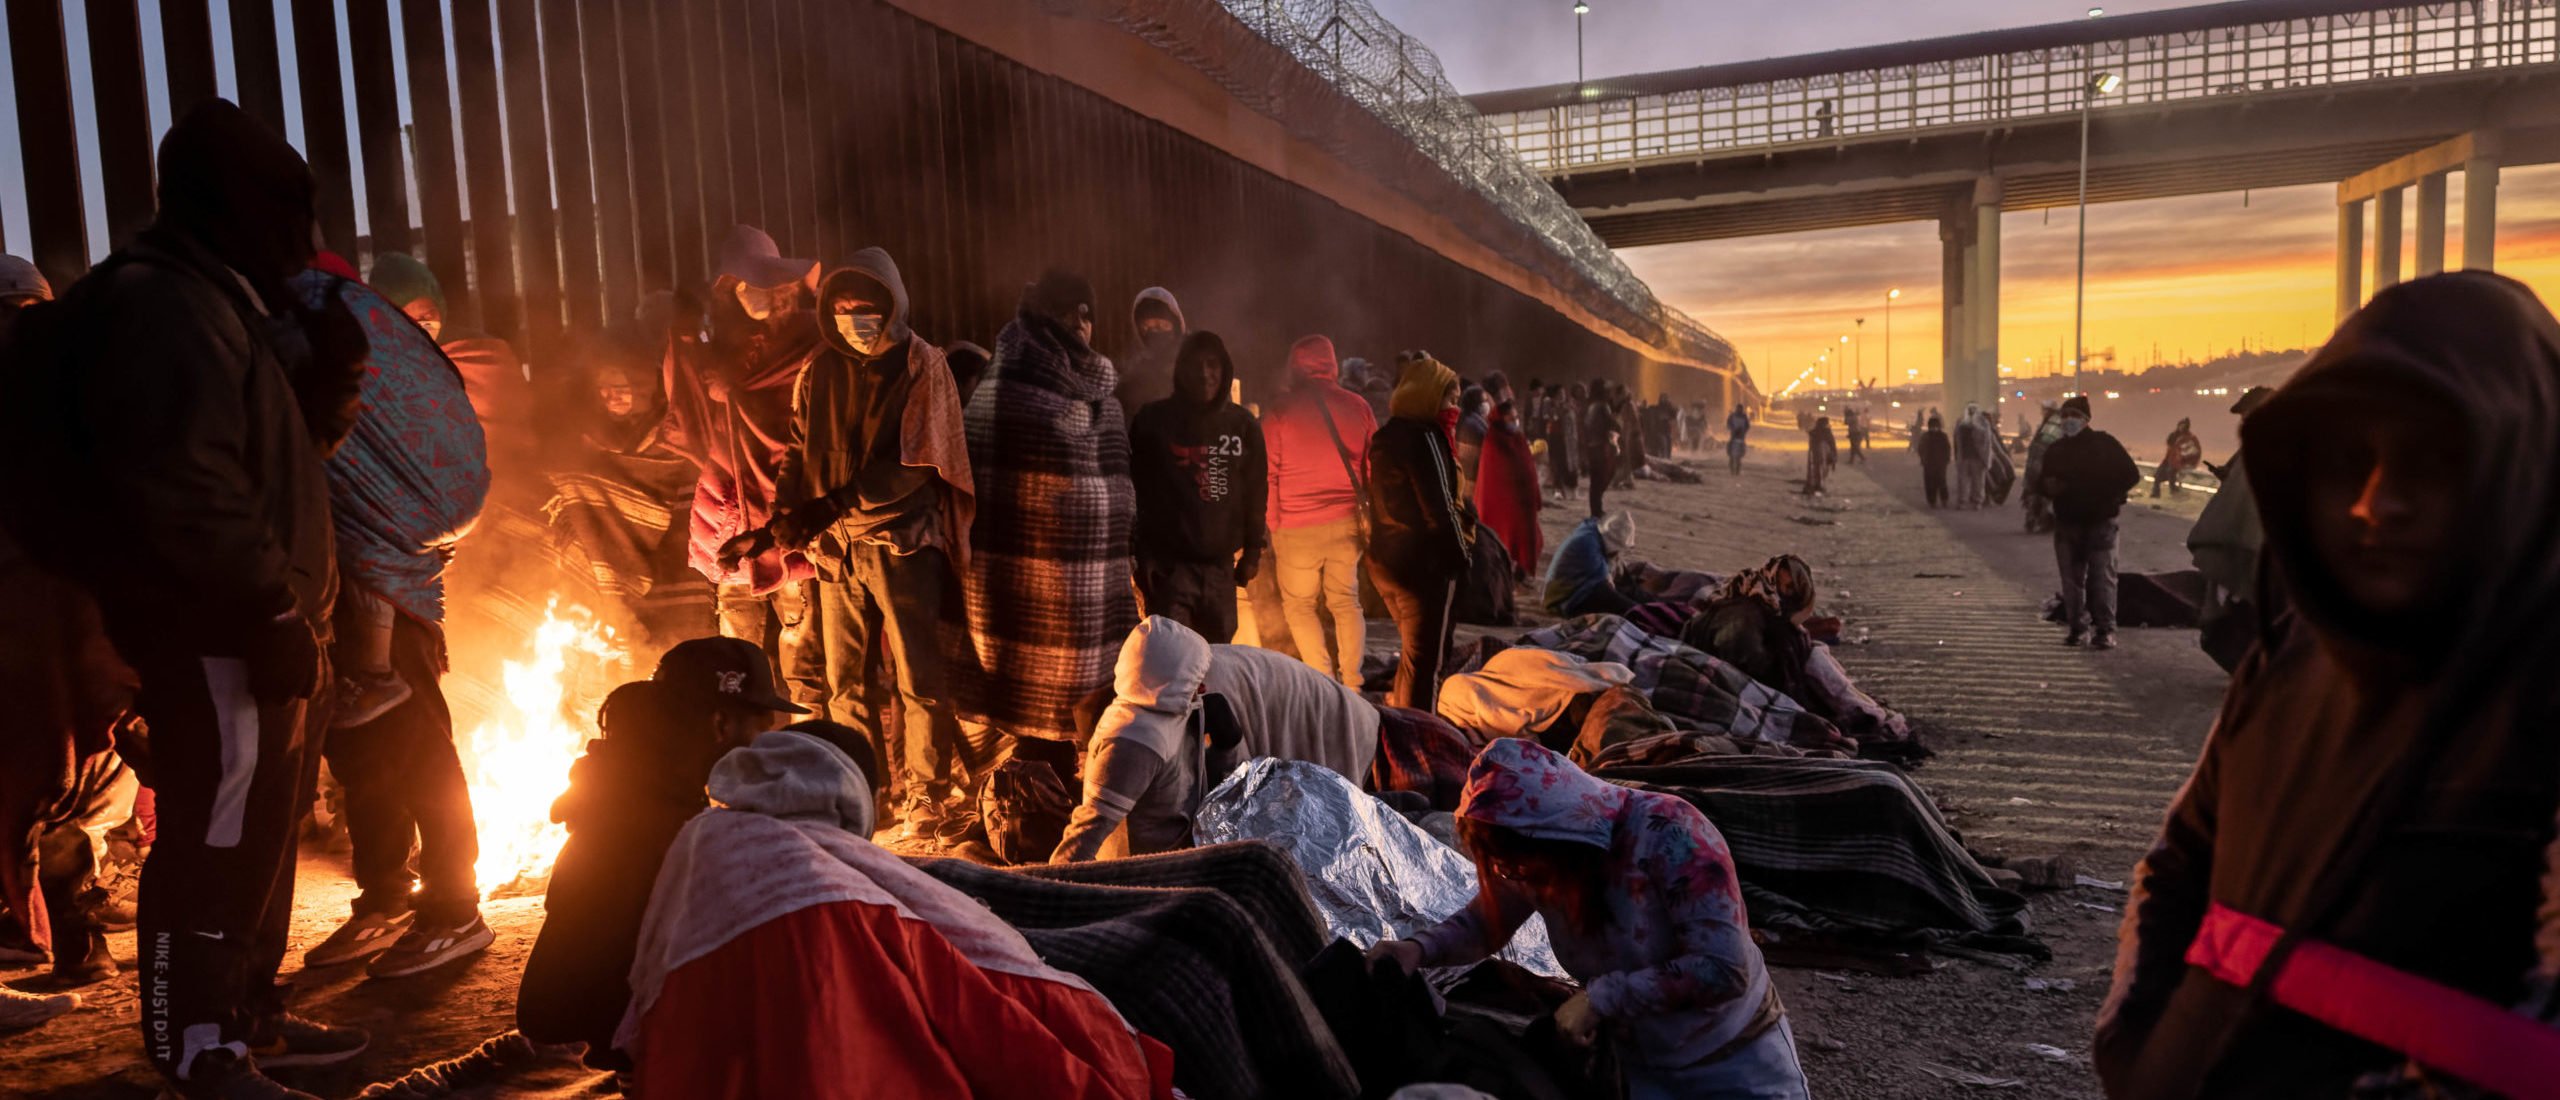 EL PASO, TEXAS - DECEMBER 22: Immigrants warm to a fire at dawn after spending the night outside next to the U.S.-Mexico border fence on December 22, 2022 in El Paso, Texas. A spike in the number of migrants seeking asylum in the United States has challenged local, state and federal authorities. The numbers are expected to increase as the fate of the Title 42 authority to expel migrants remains in limbo pending a Supreme Court decision expected after Christmas. (Photo by John Moore/Getty Images)